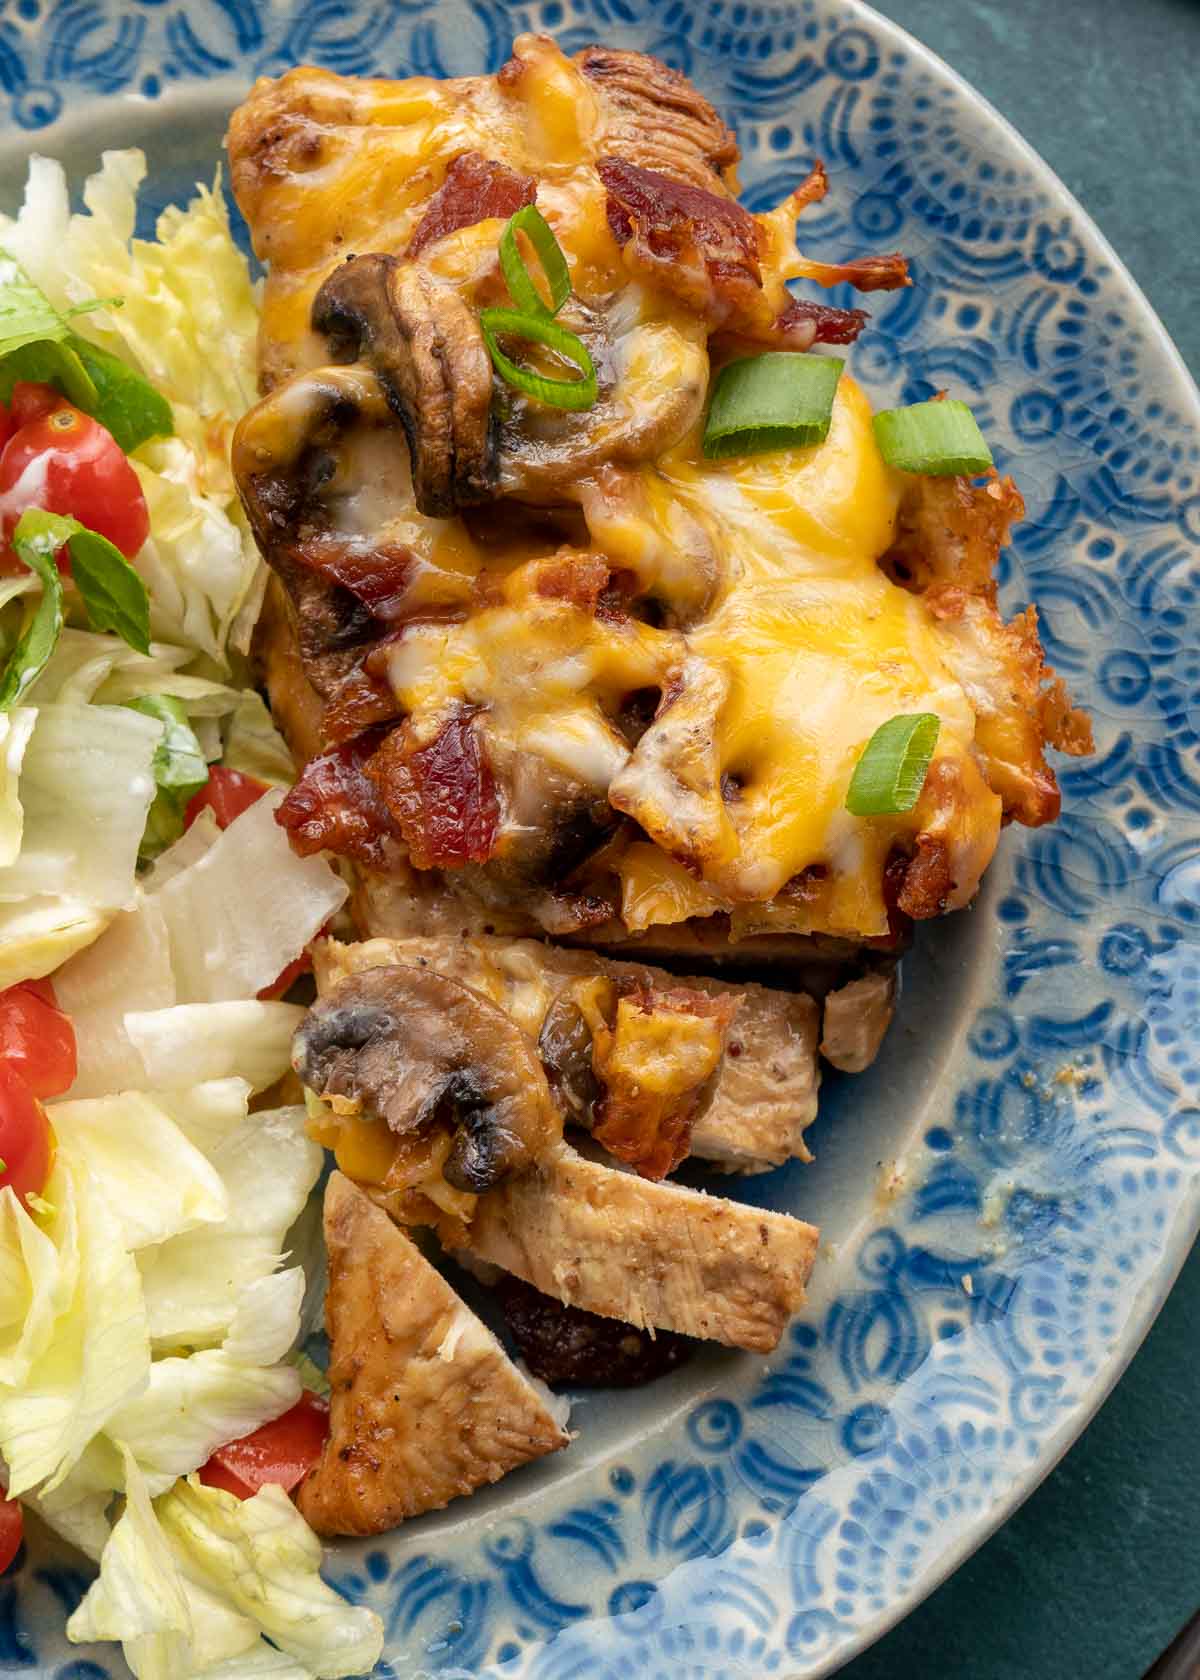 Cheesy chicken and a salad on blue plate